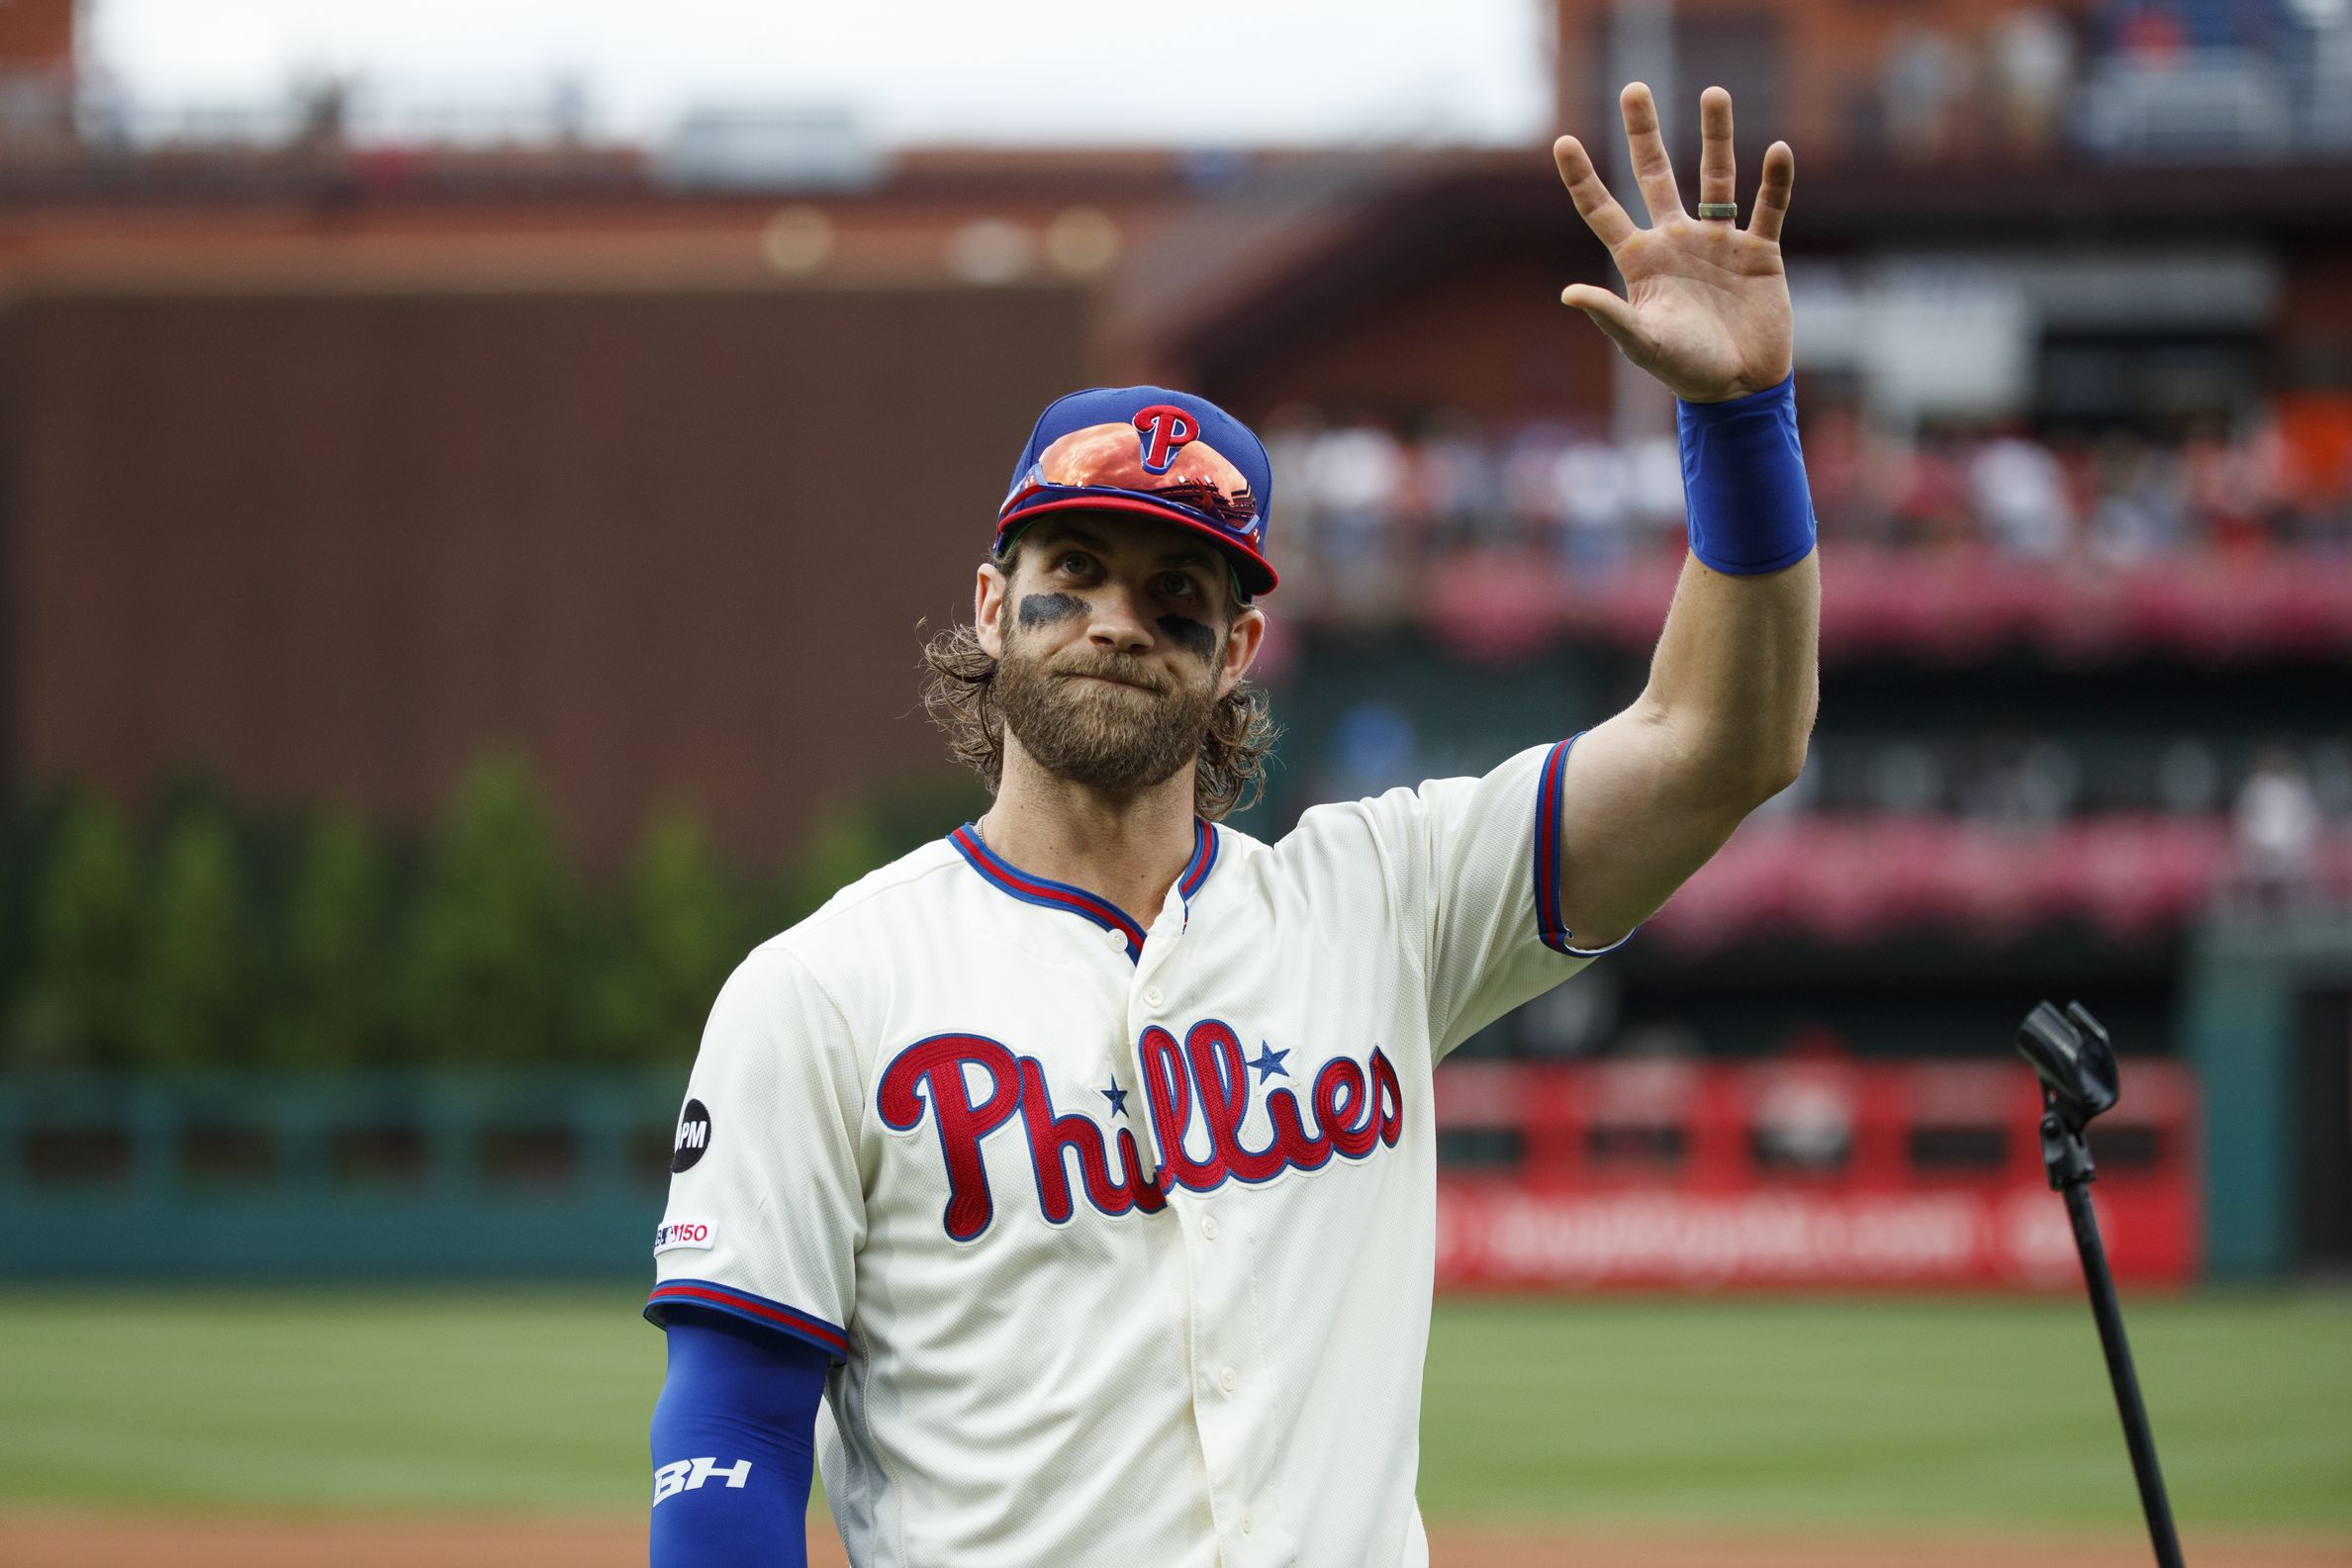 MLB, Rob Manfred deny Phillies' request to allow Bryce Harper